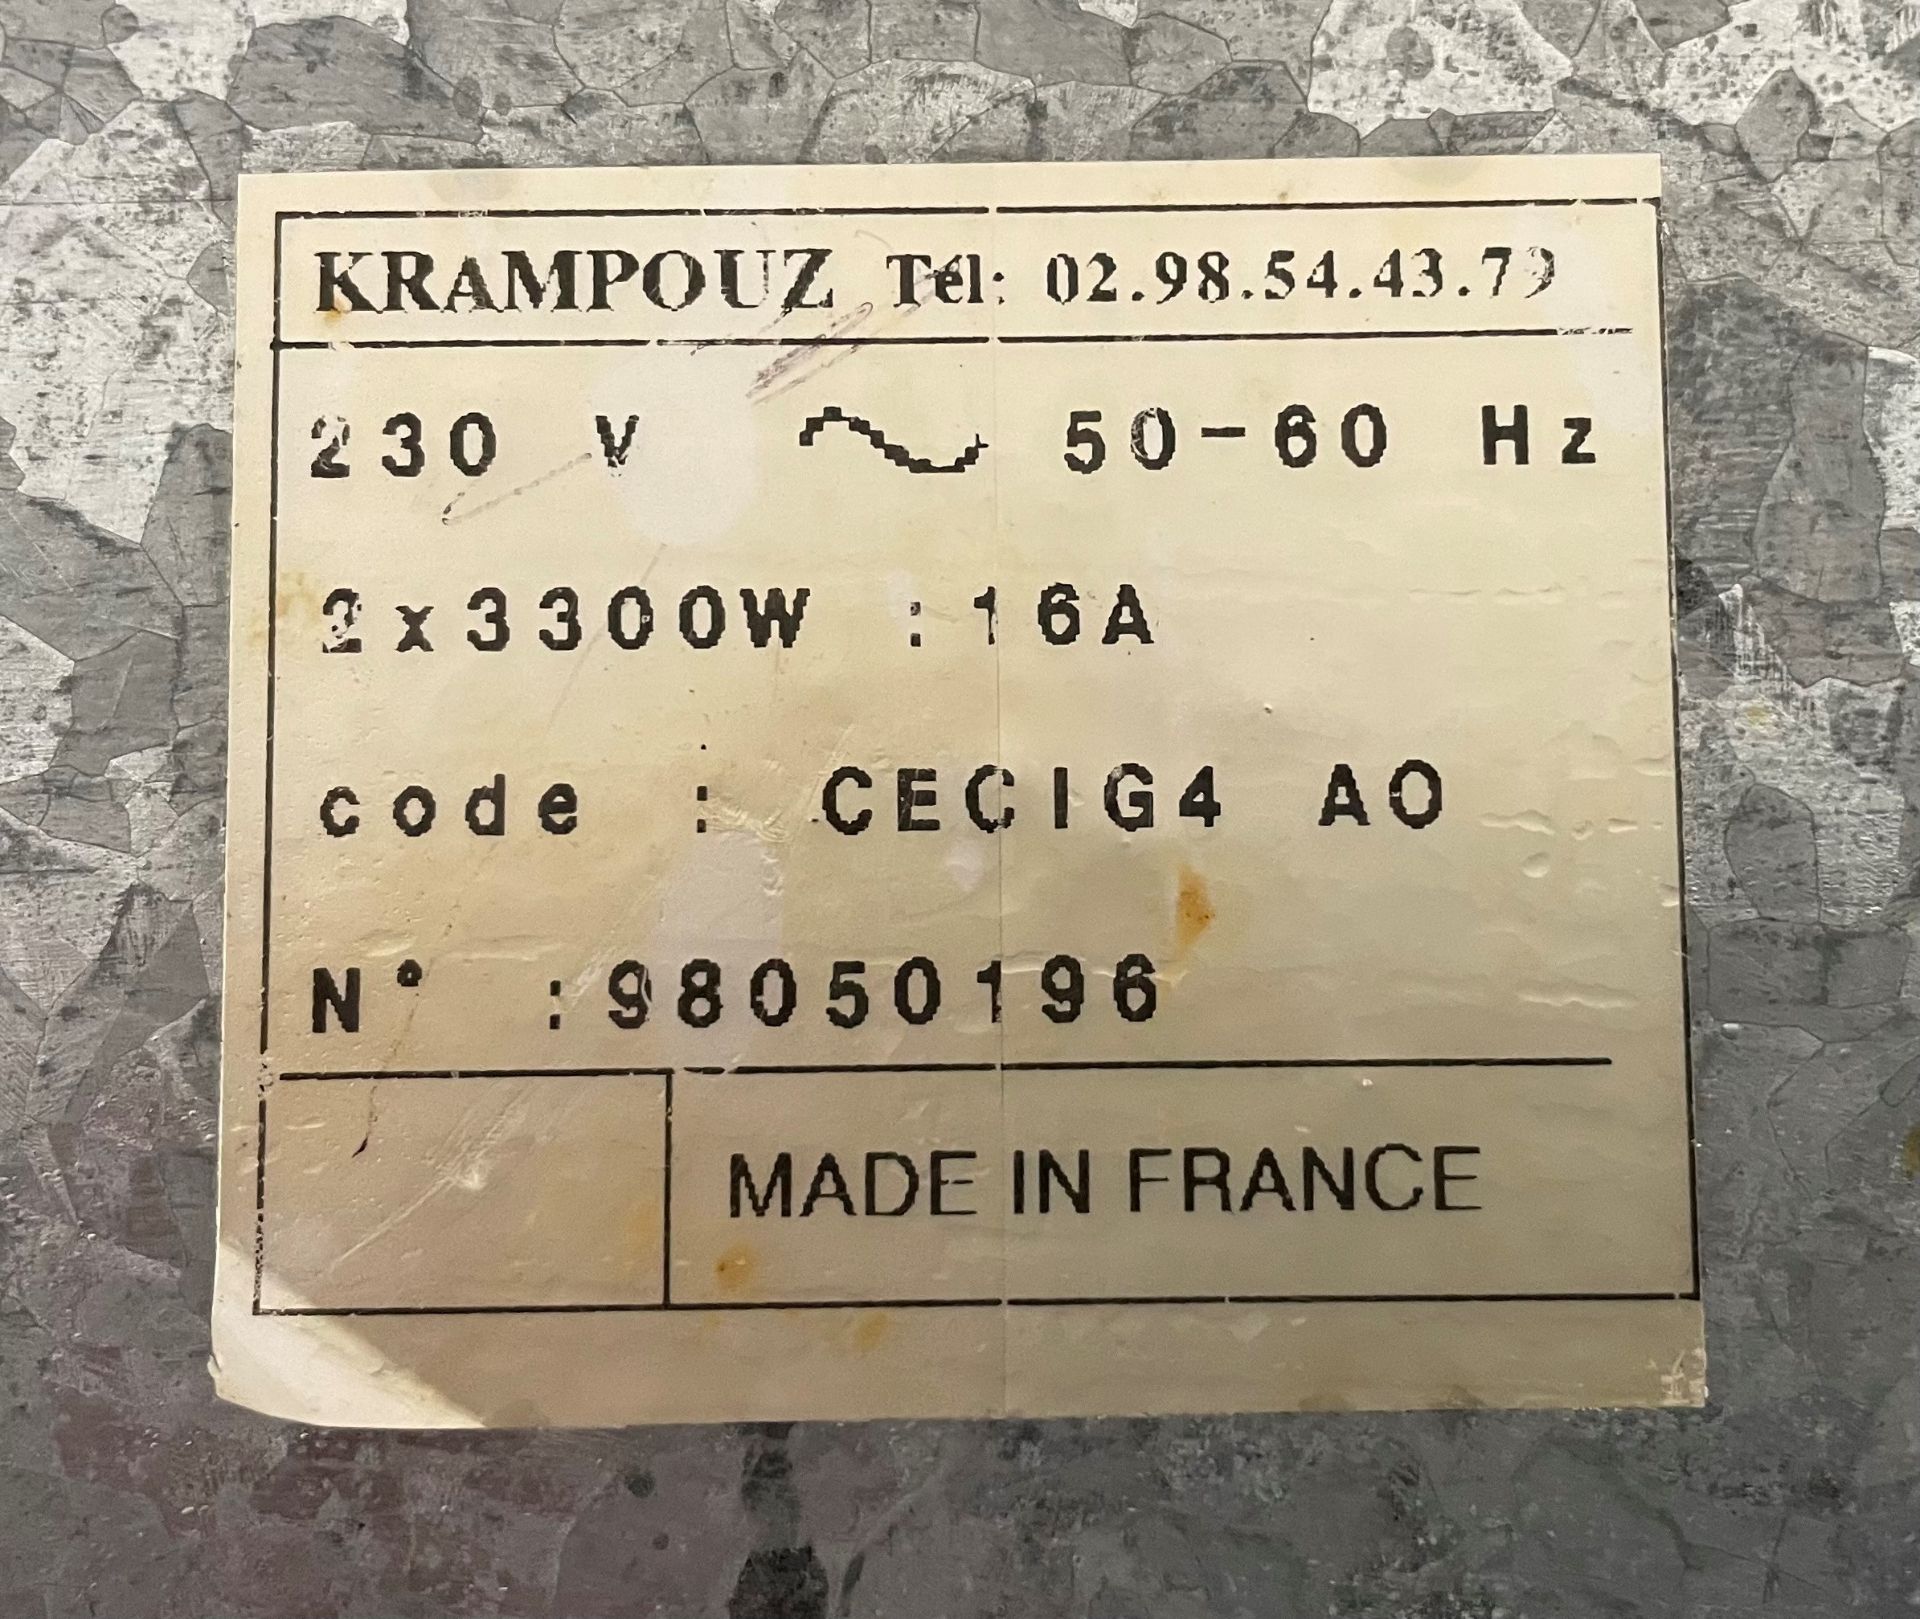 Krampouz Crepe Maker Cast Iron 2 Round Griddle. 2 x 3300W Griddle. 16A. Made in France. 2 x Power - Image 6 of 8